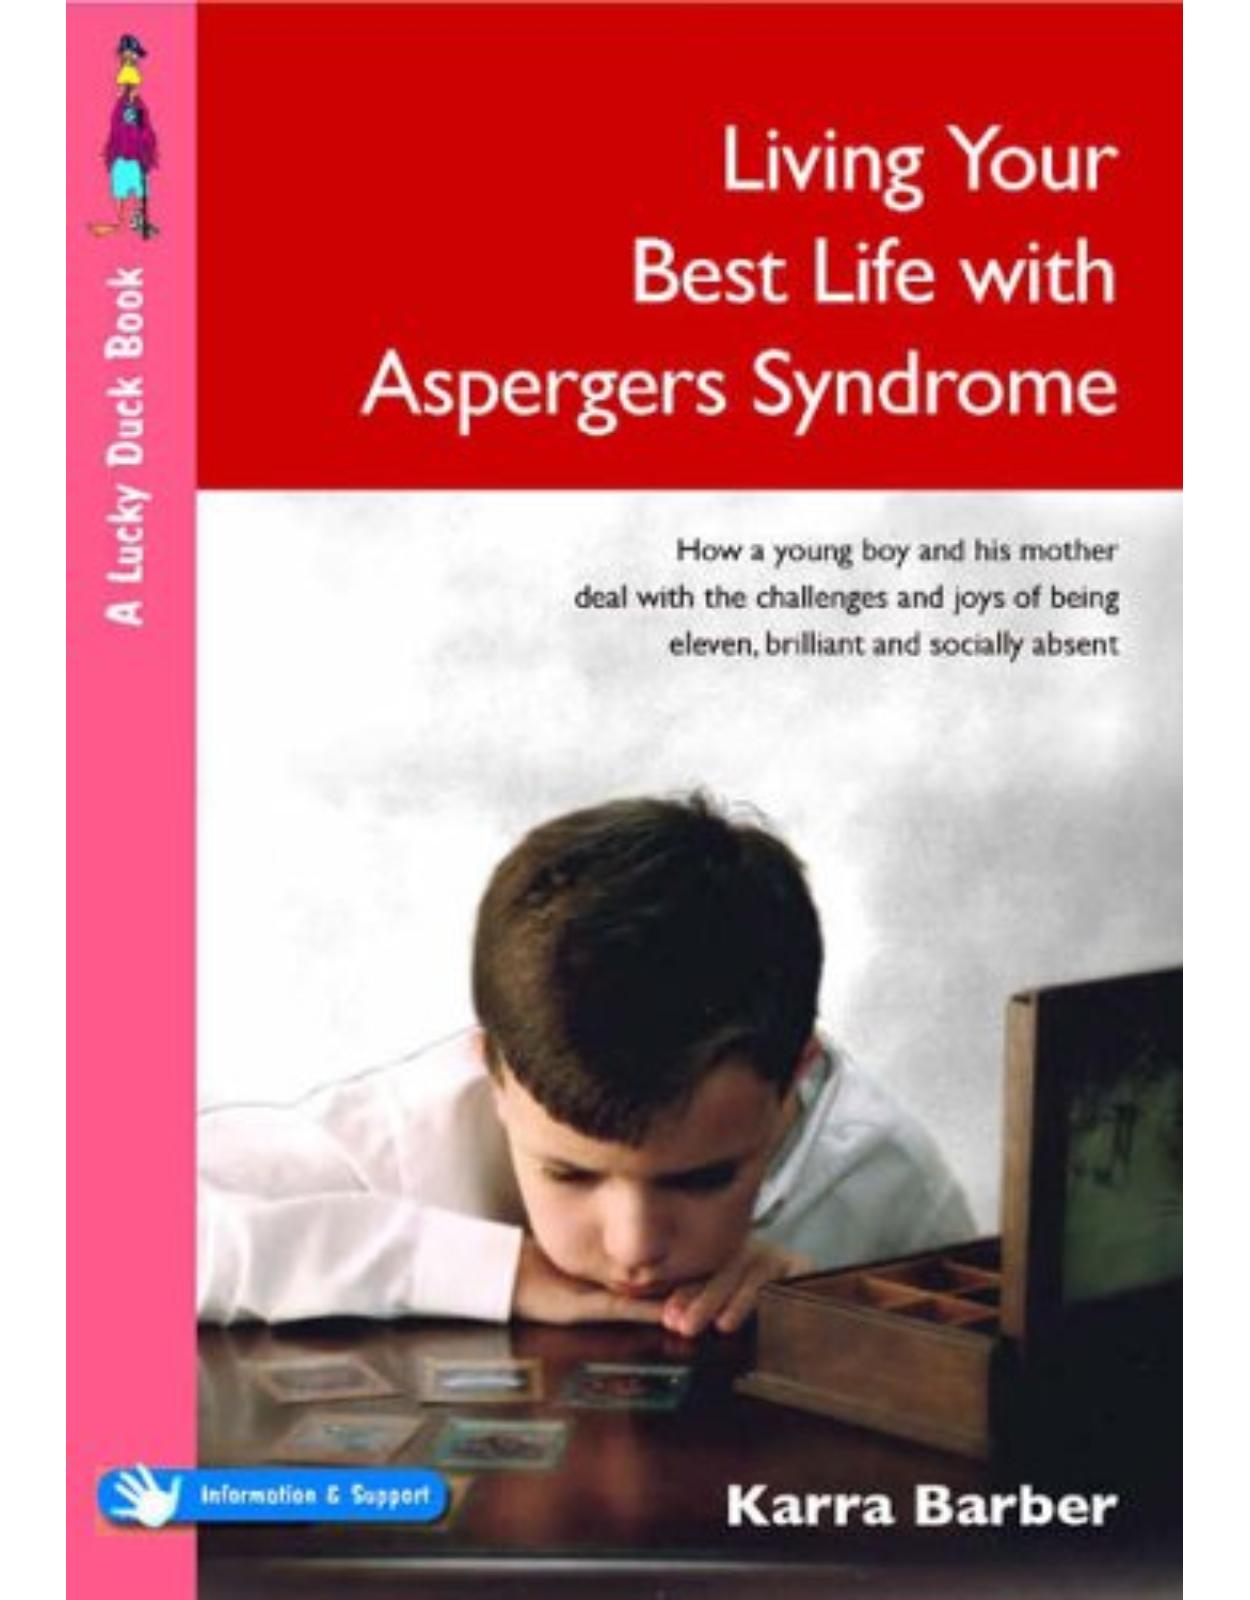 Living Your Best Life with Asperger's Syndrome